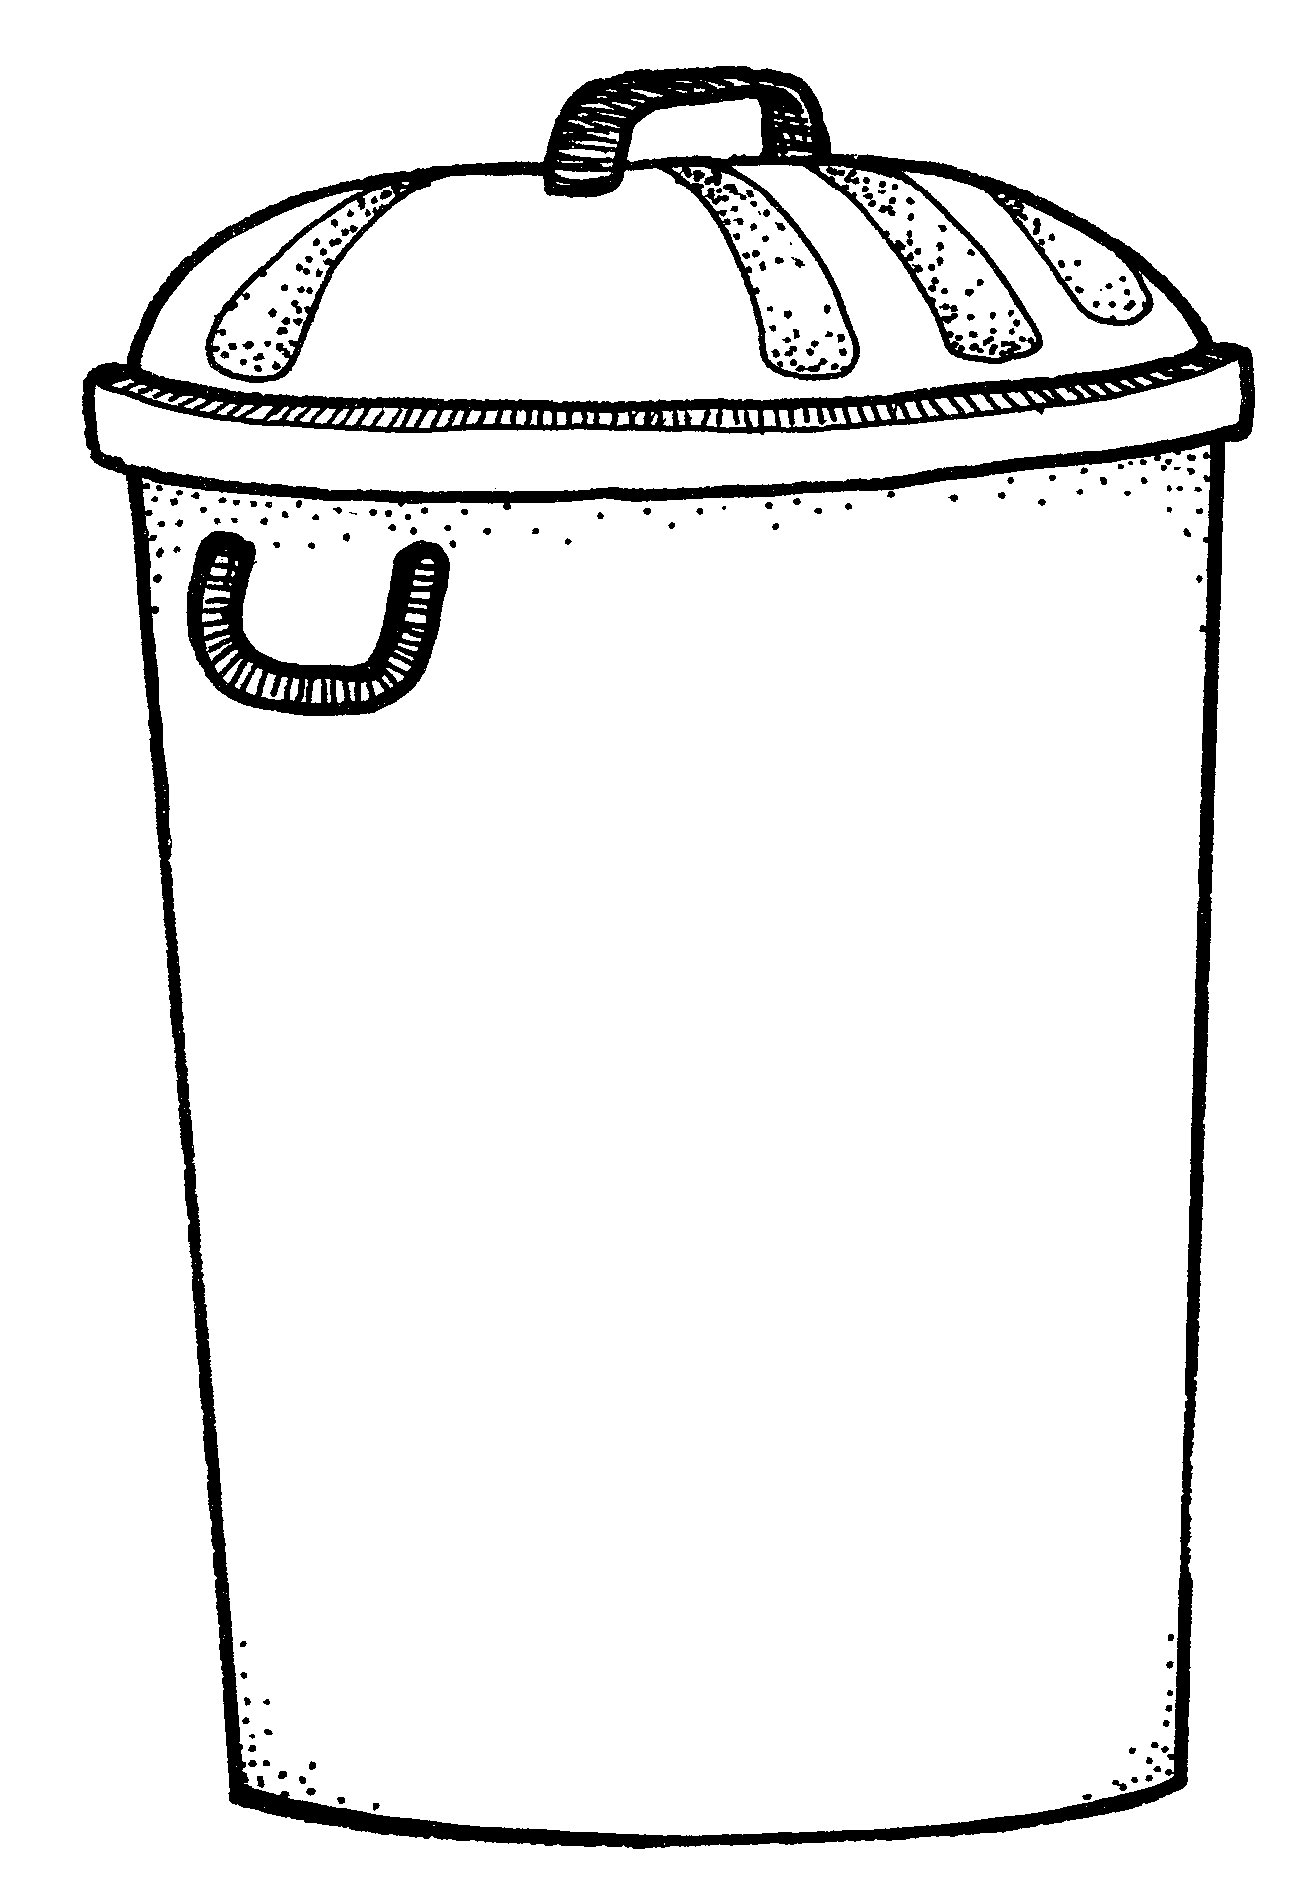 Garbage Can Clipart